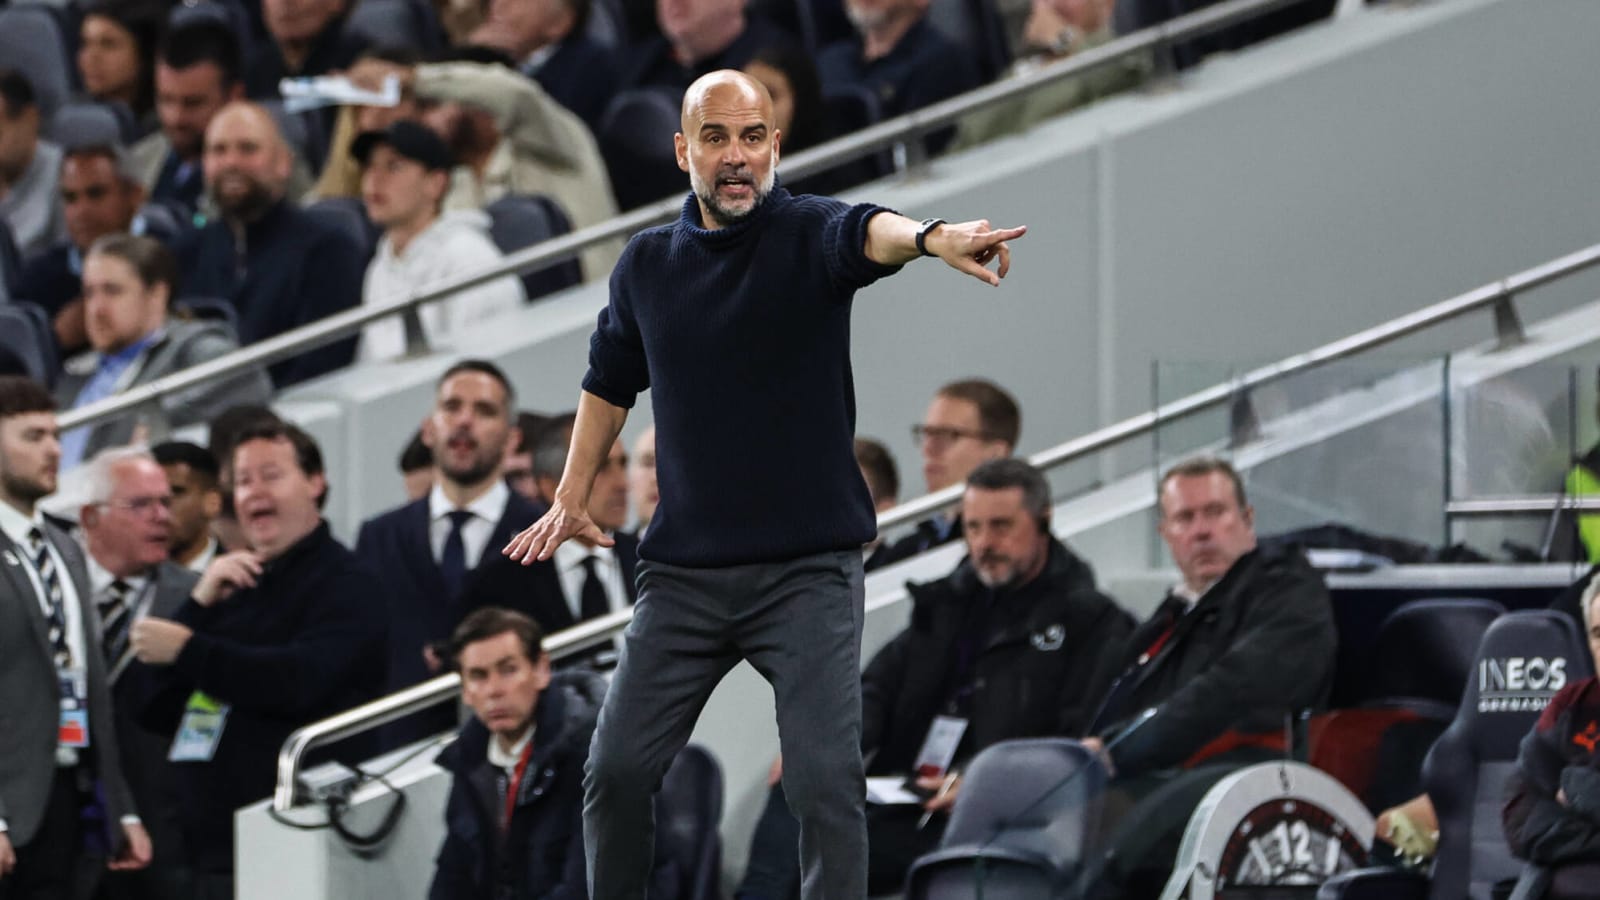 Pep Guardiola has a cheeky reaction to reporter asking whether people like Manchester City or not